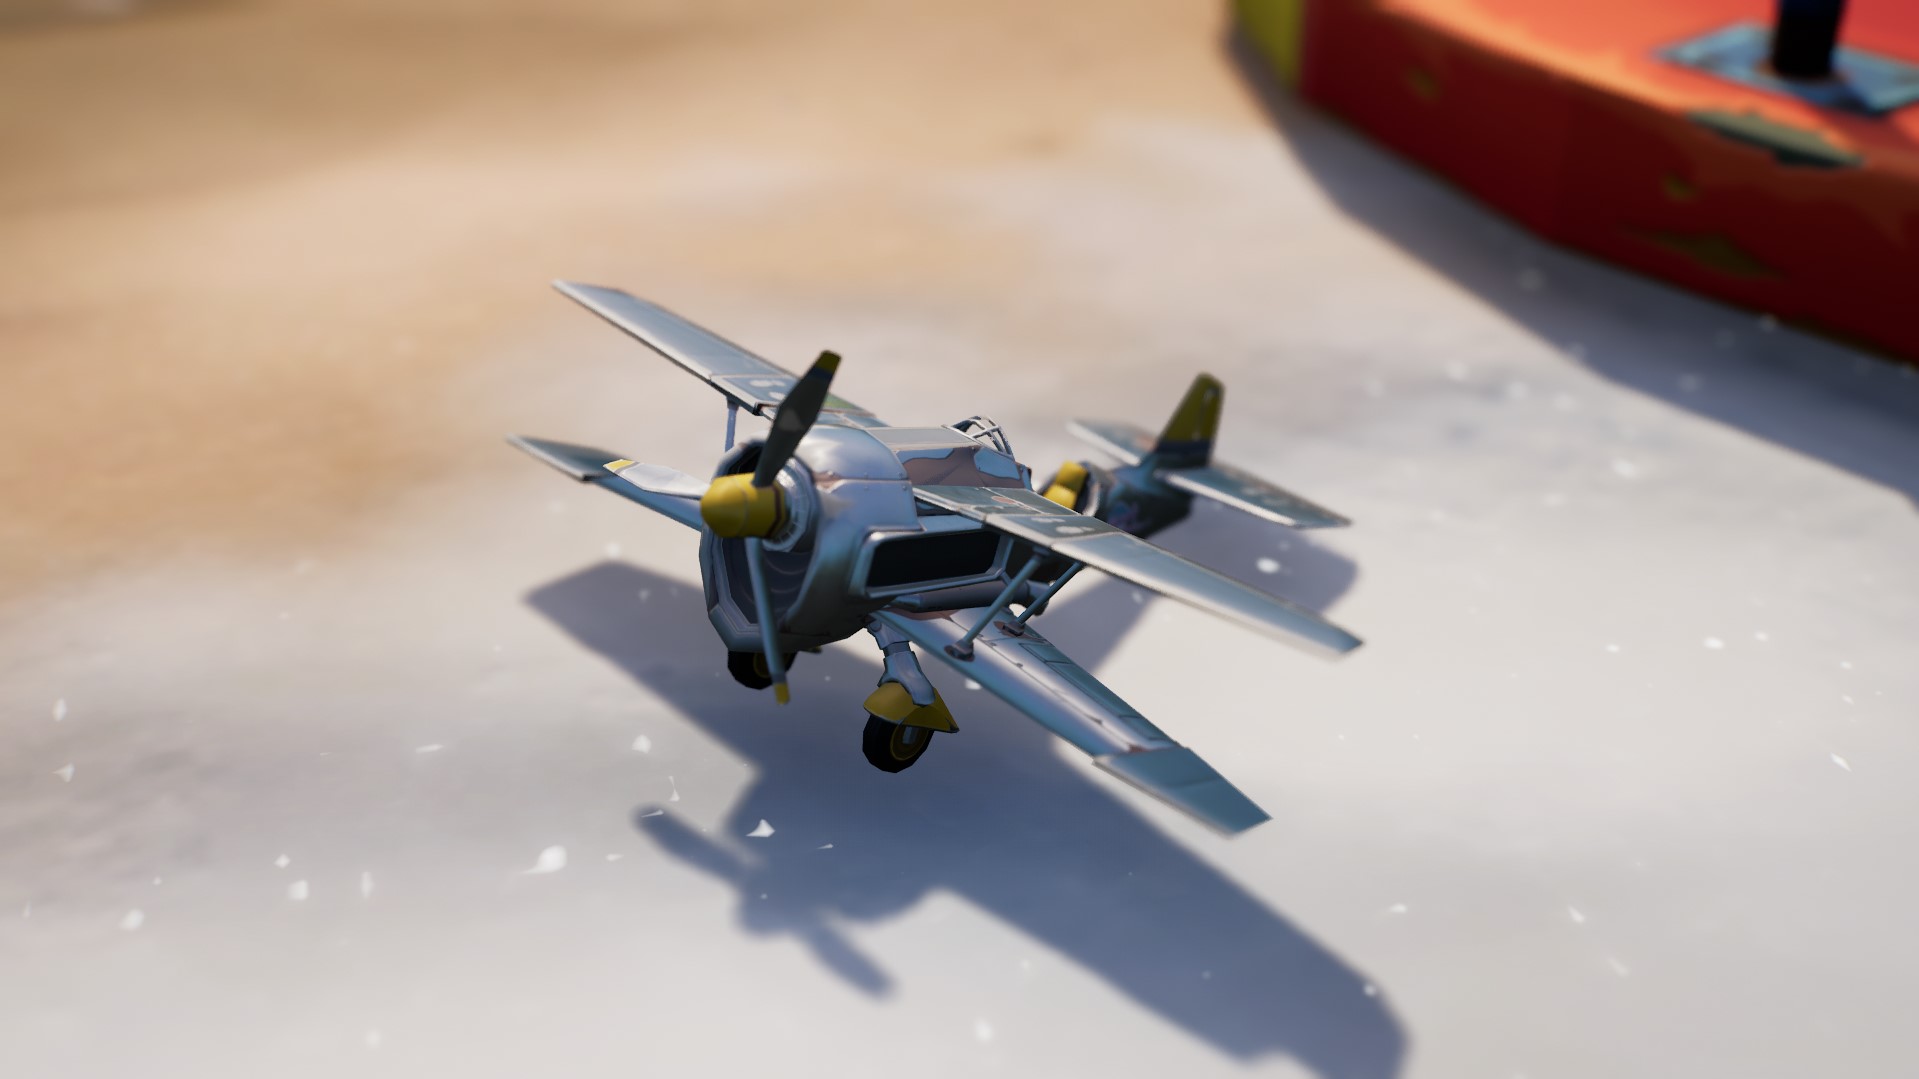 Collect Toy Biplanes at Condo Canyon, Greasy Grove, or Sleepy Sound - Winterfest 2021 challenge  